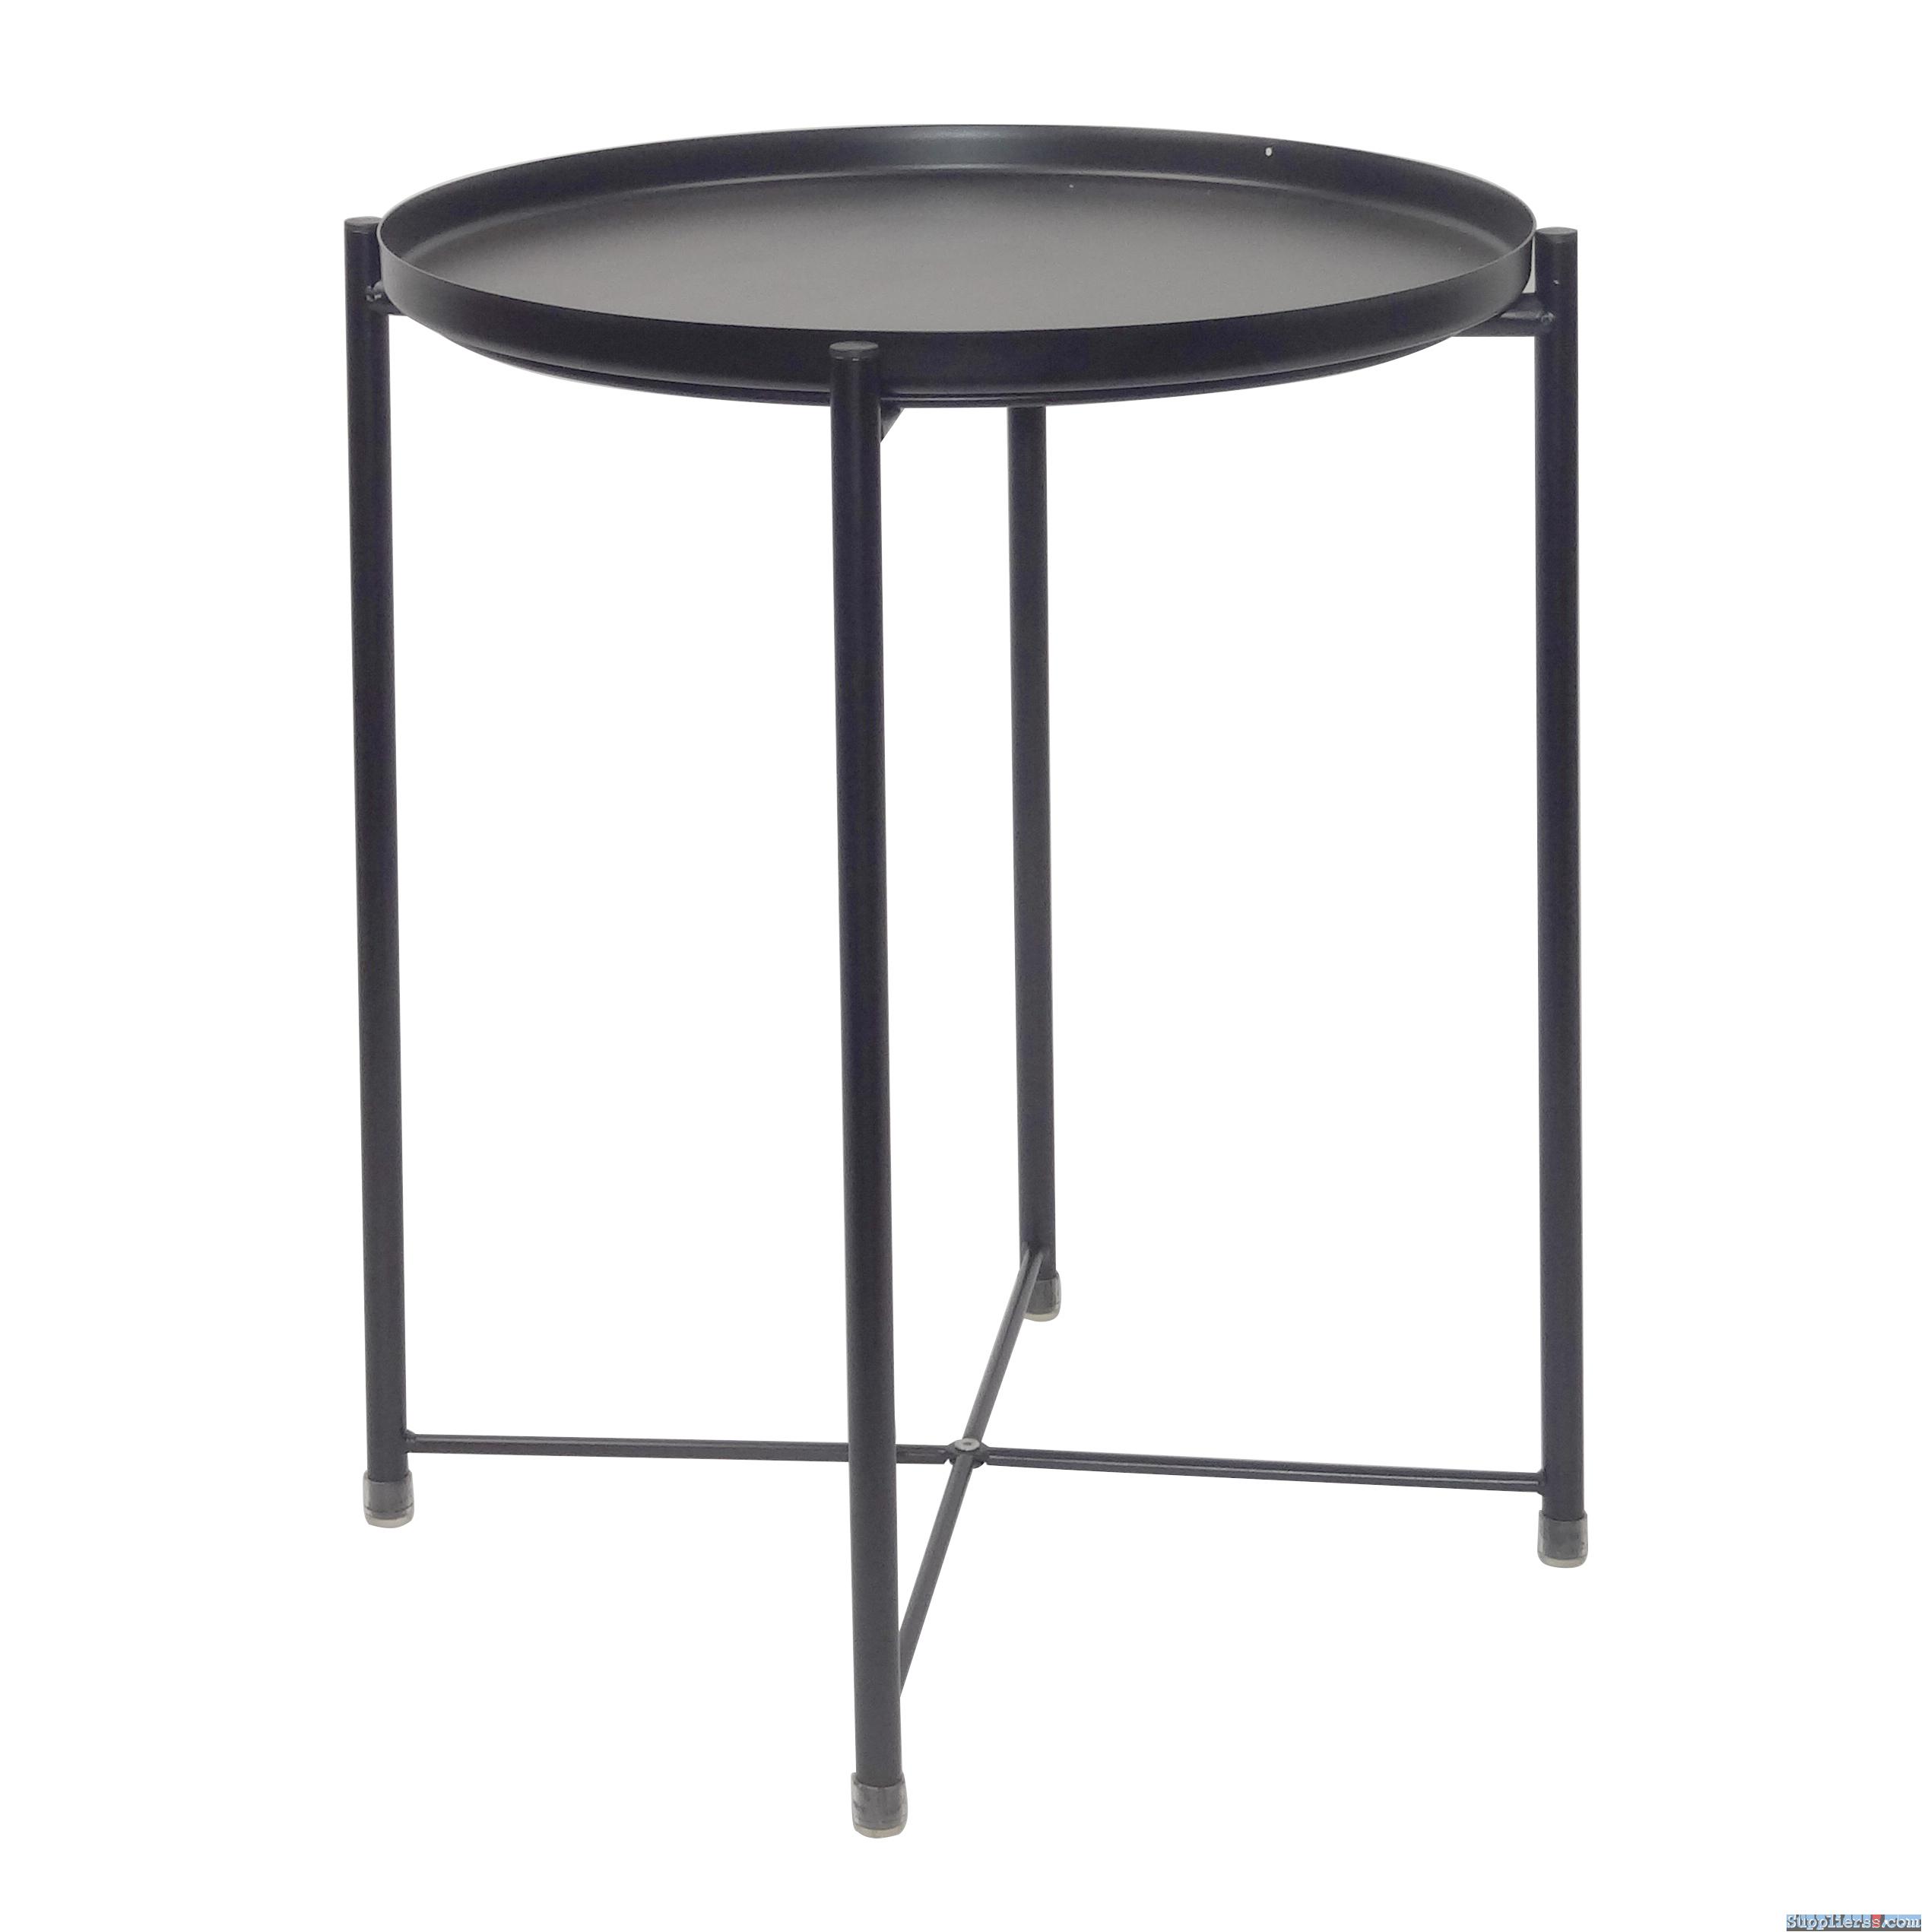 Reversible Metal Tray End Table for Living Room Waiting Room Bedroom Balcony